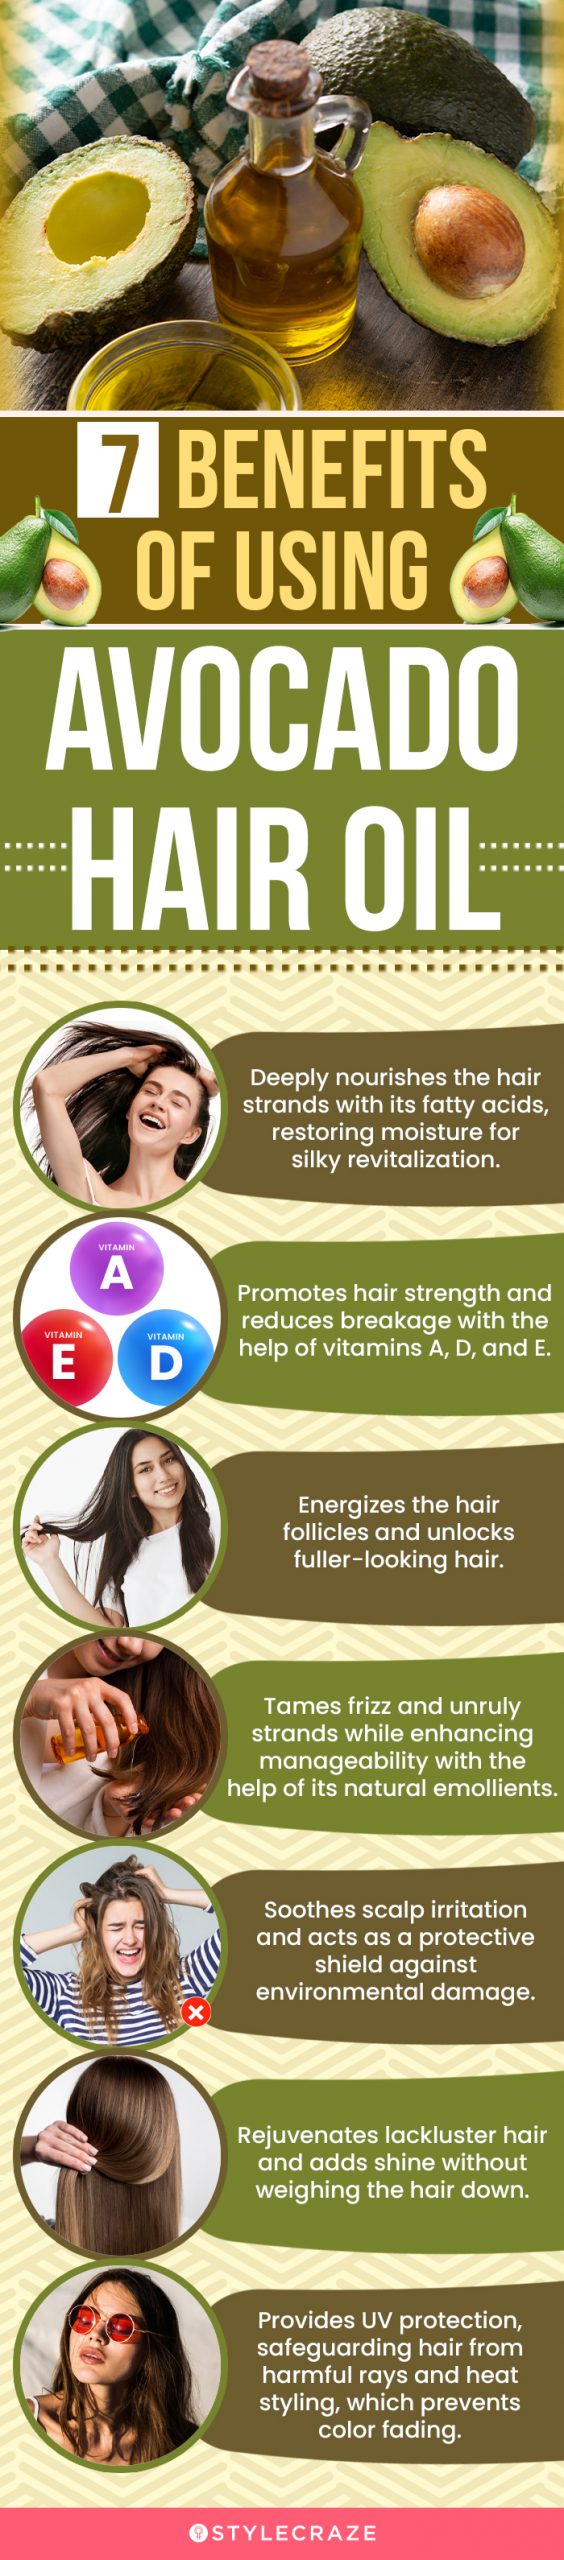 7 Benefits Of Using Avocado Hair Oil (infographic)